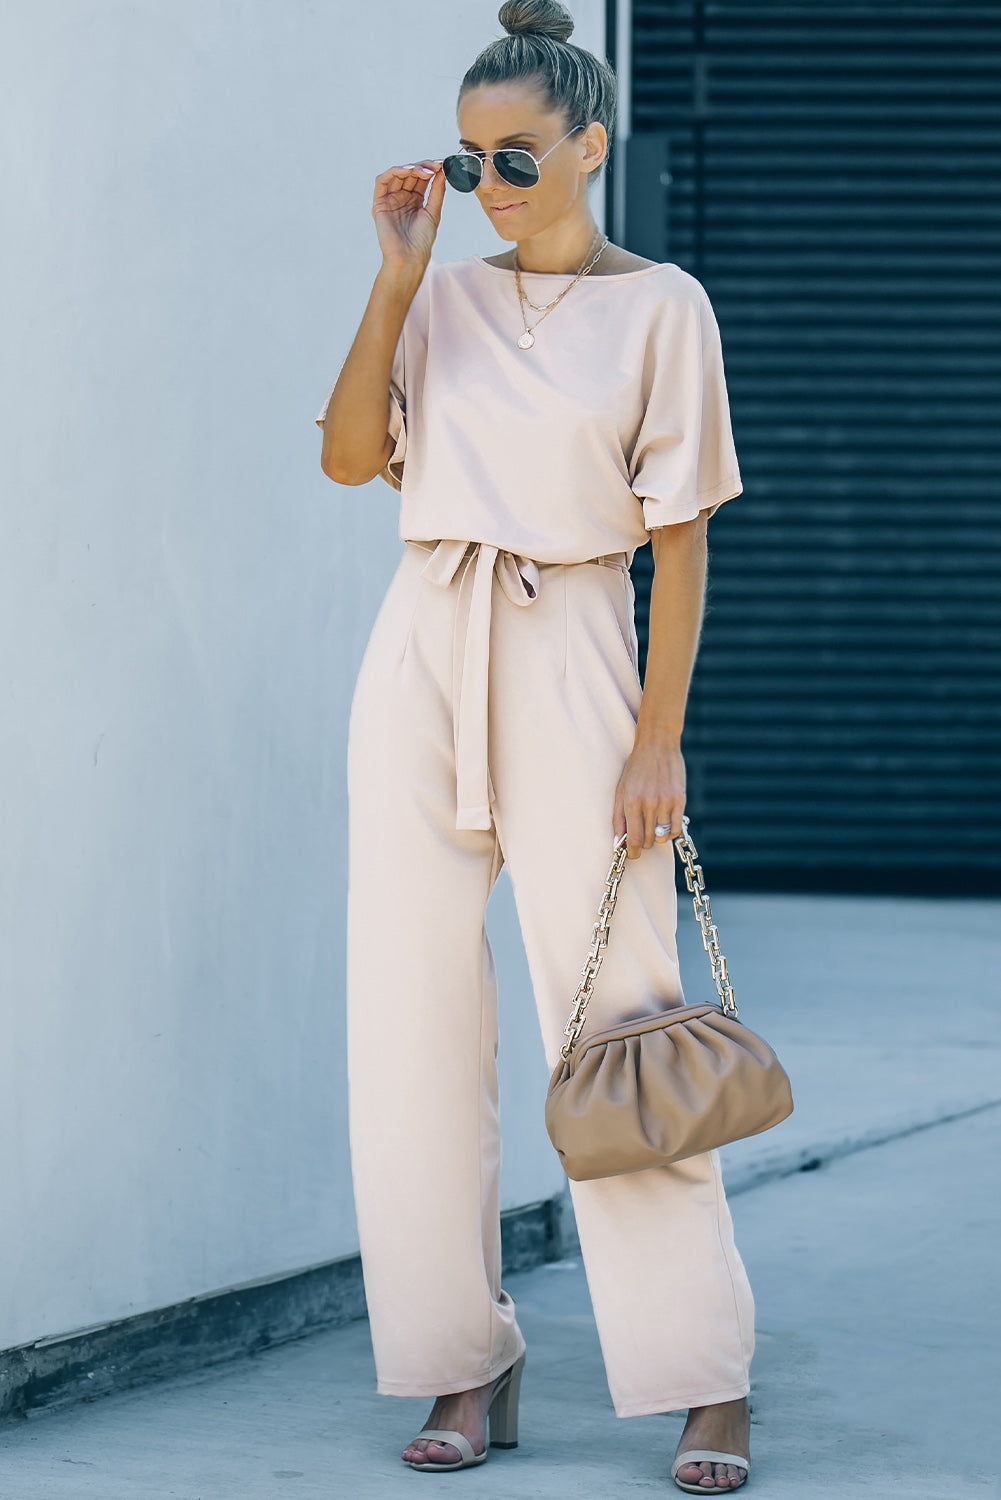 Apricot Oh So Glam Belted Wide Leg Jumpsuit